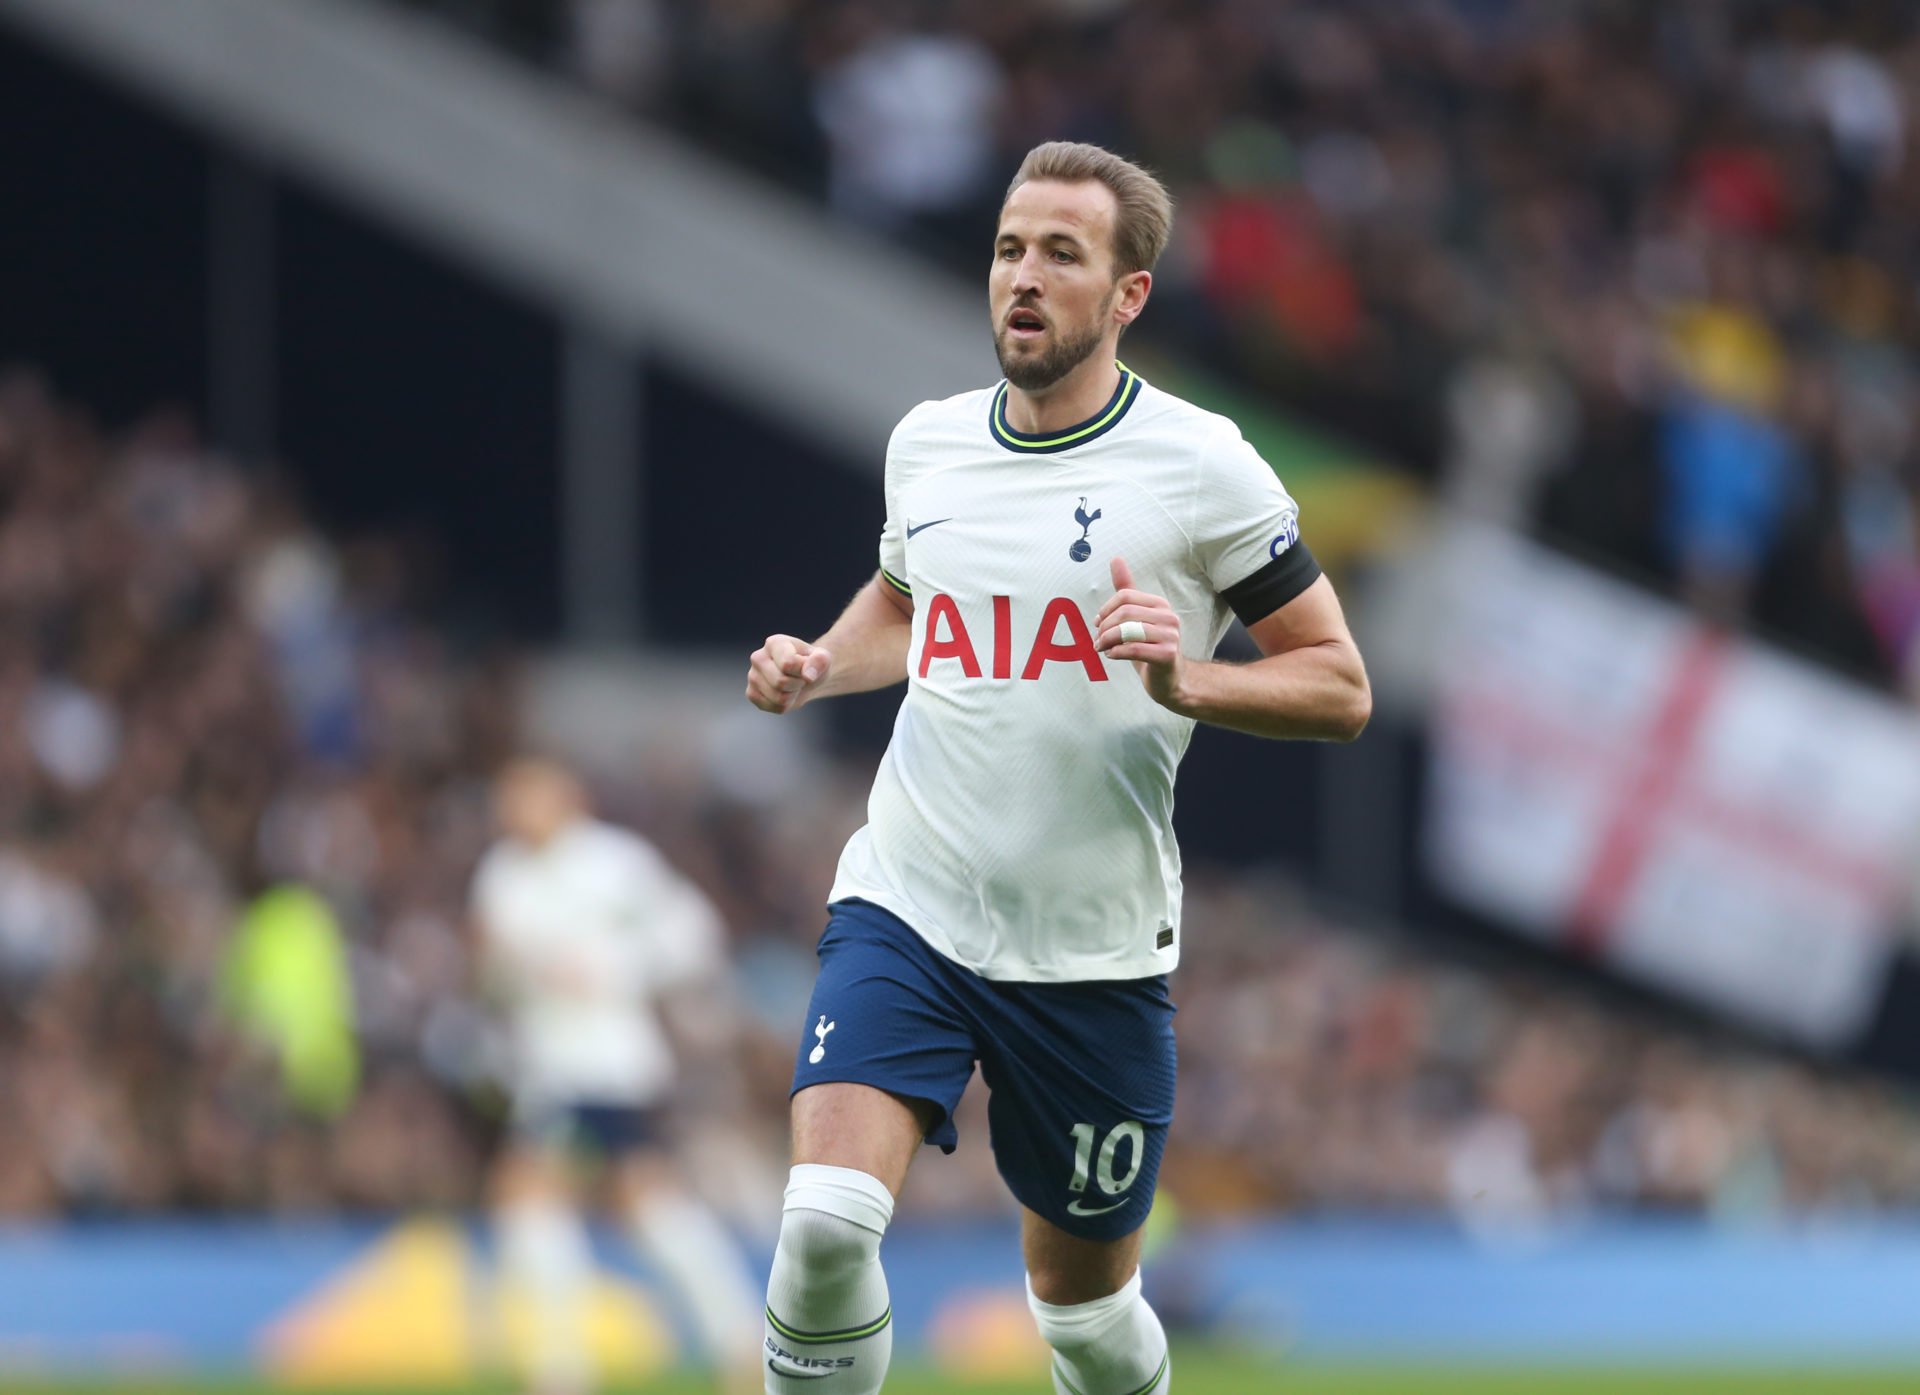 Jamie Redknapp tips Tottenham striker Harry Kane to sign new contract  within months to end speculation over future, Football News